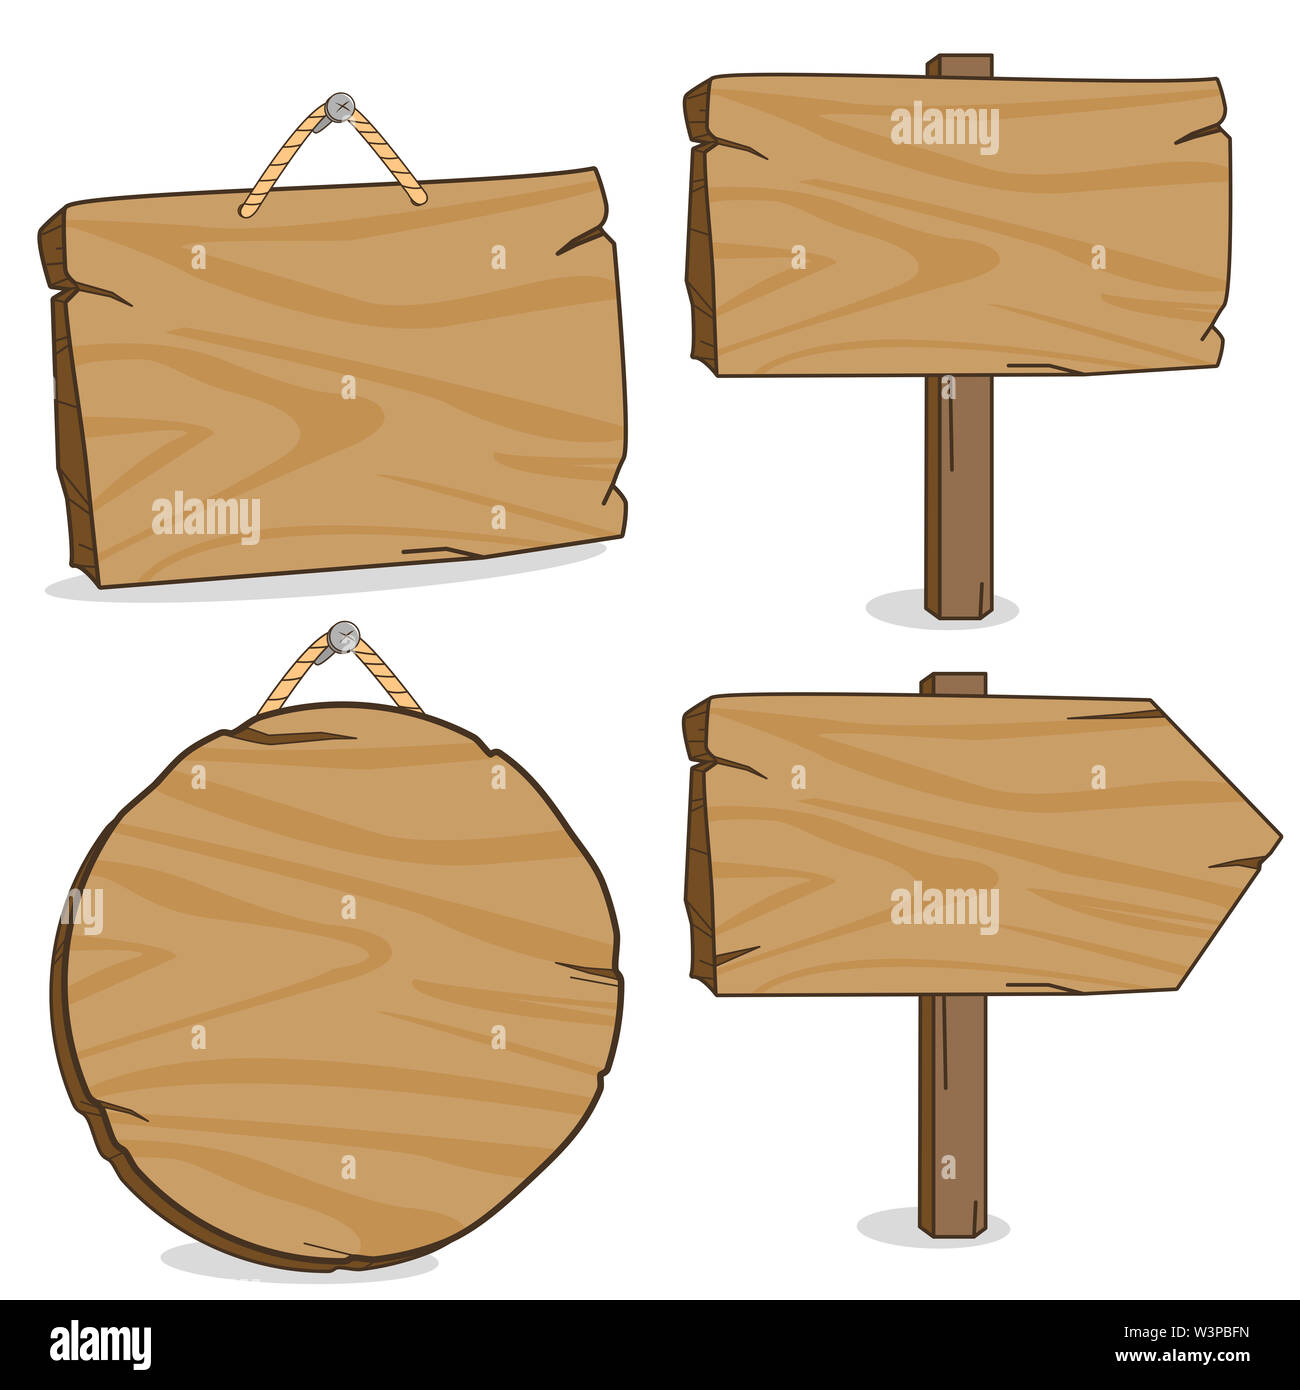 Illustration set of wooden hanging signs and signposts. Stock Photo